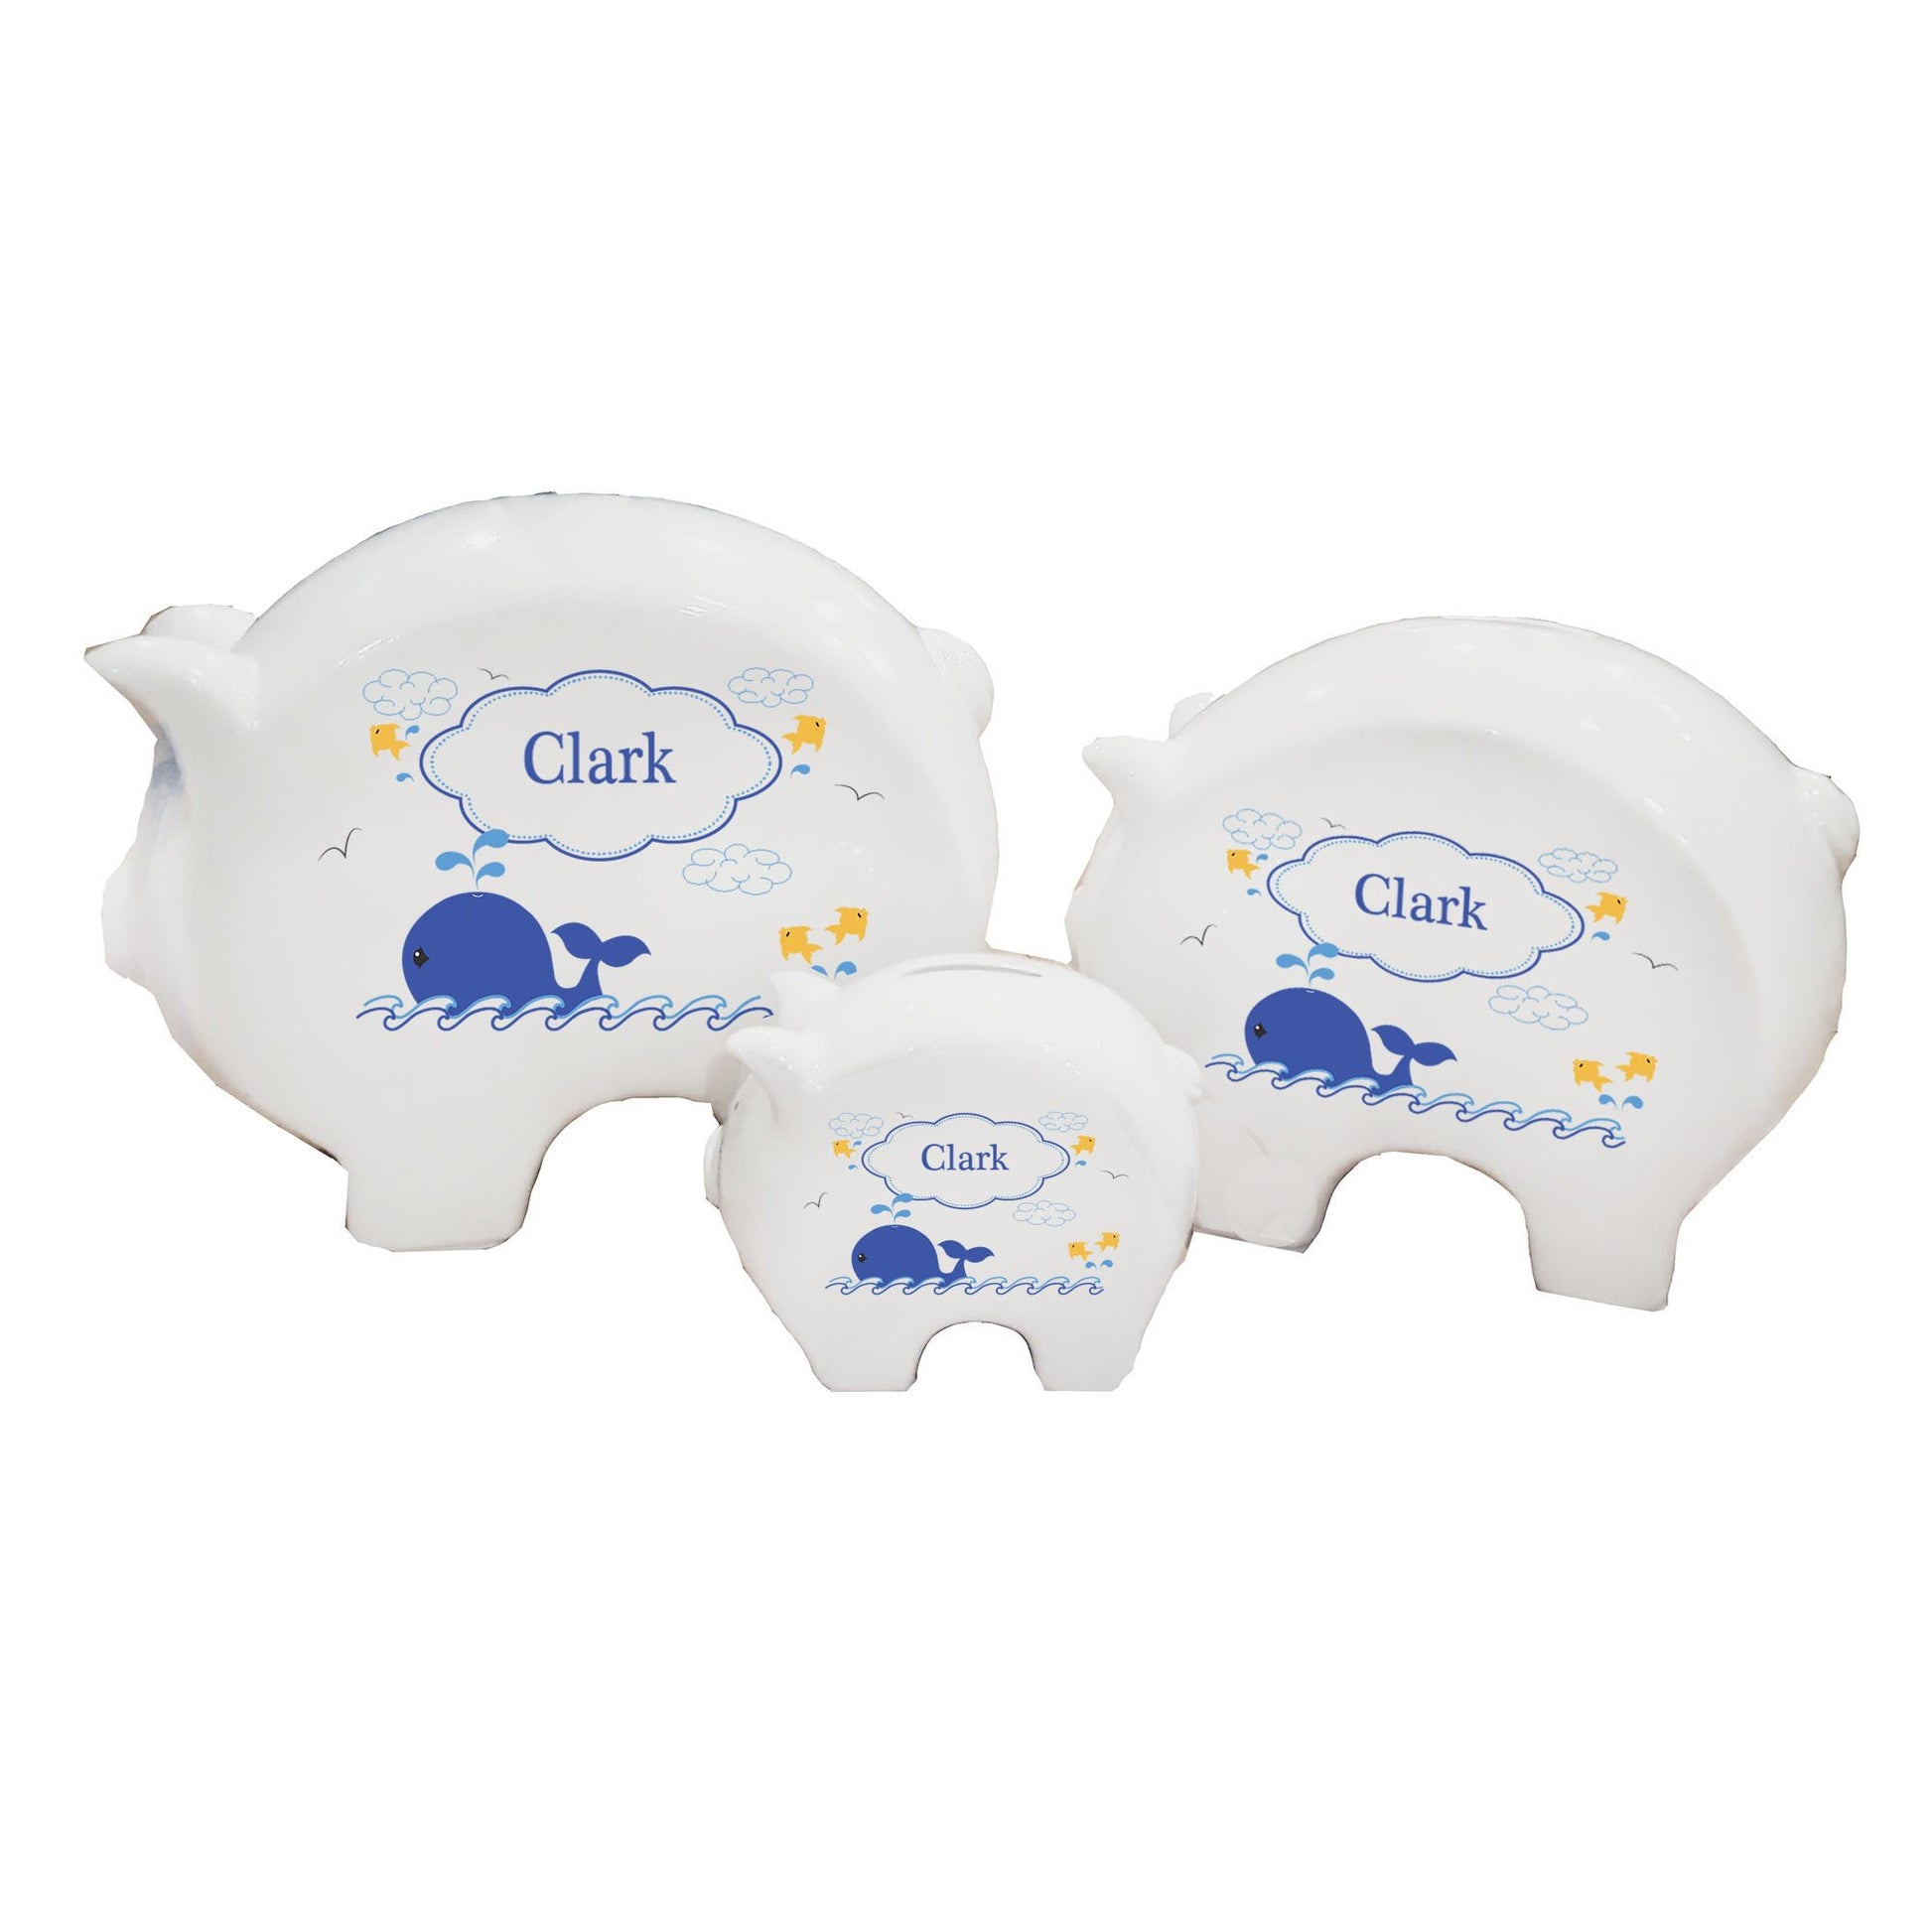 Personalized Piggy Bank with Blue Whale design